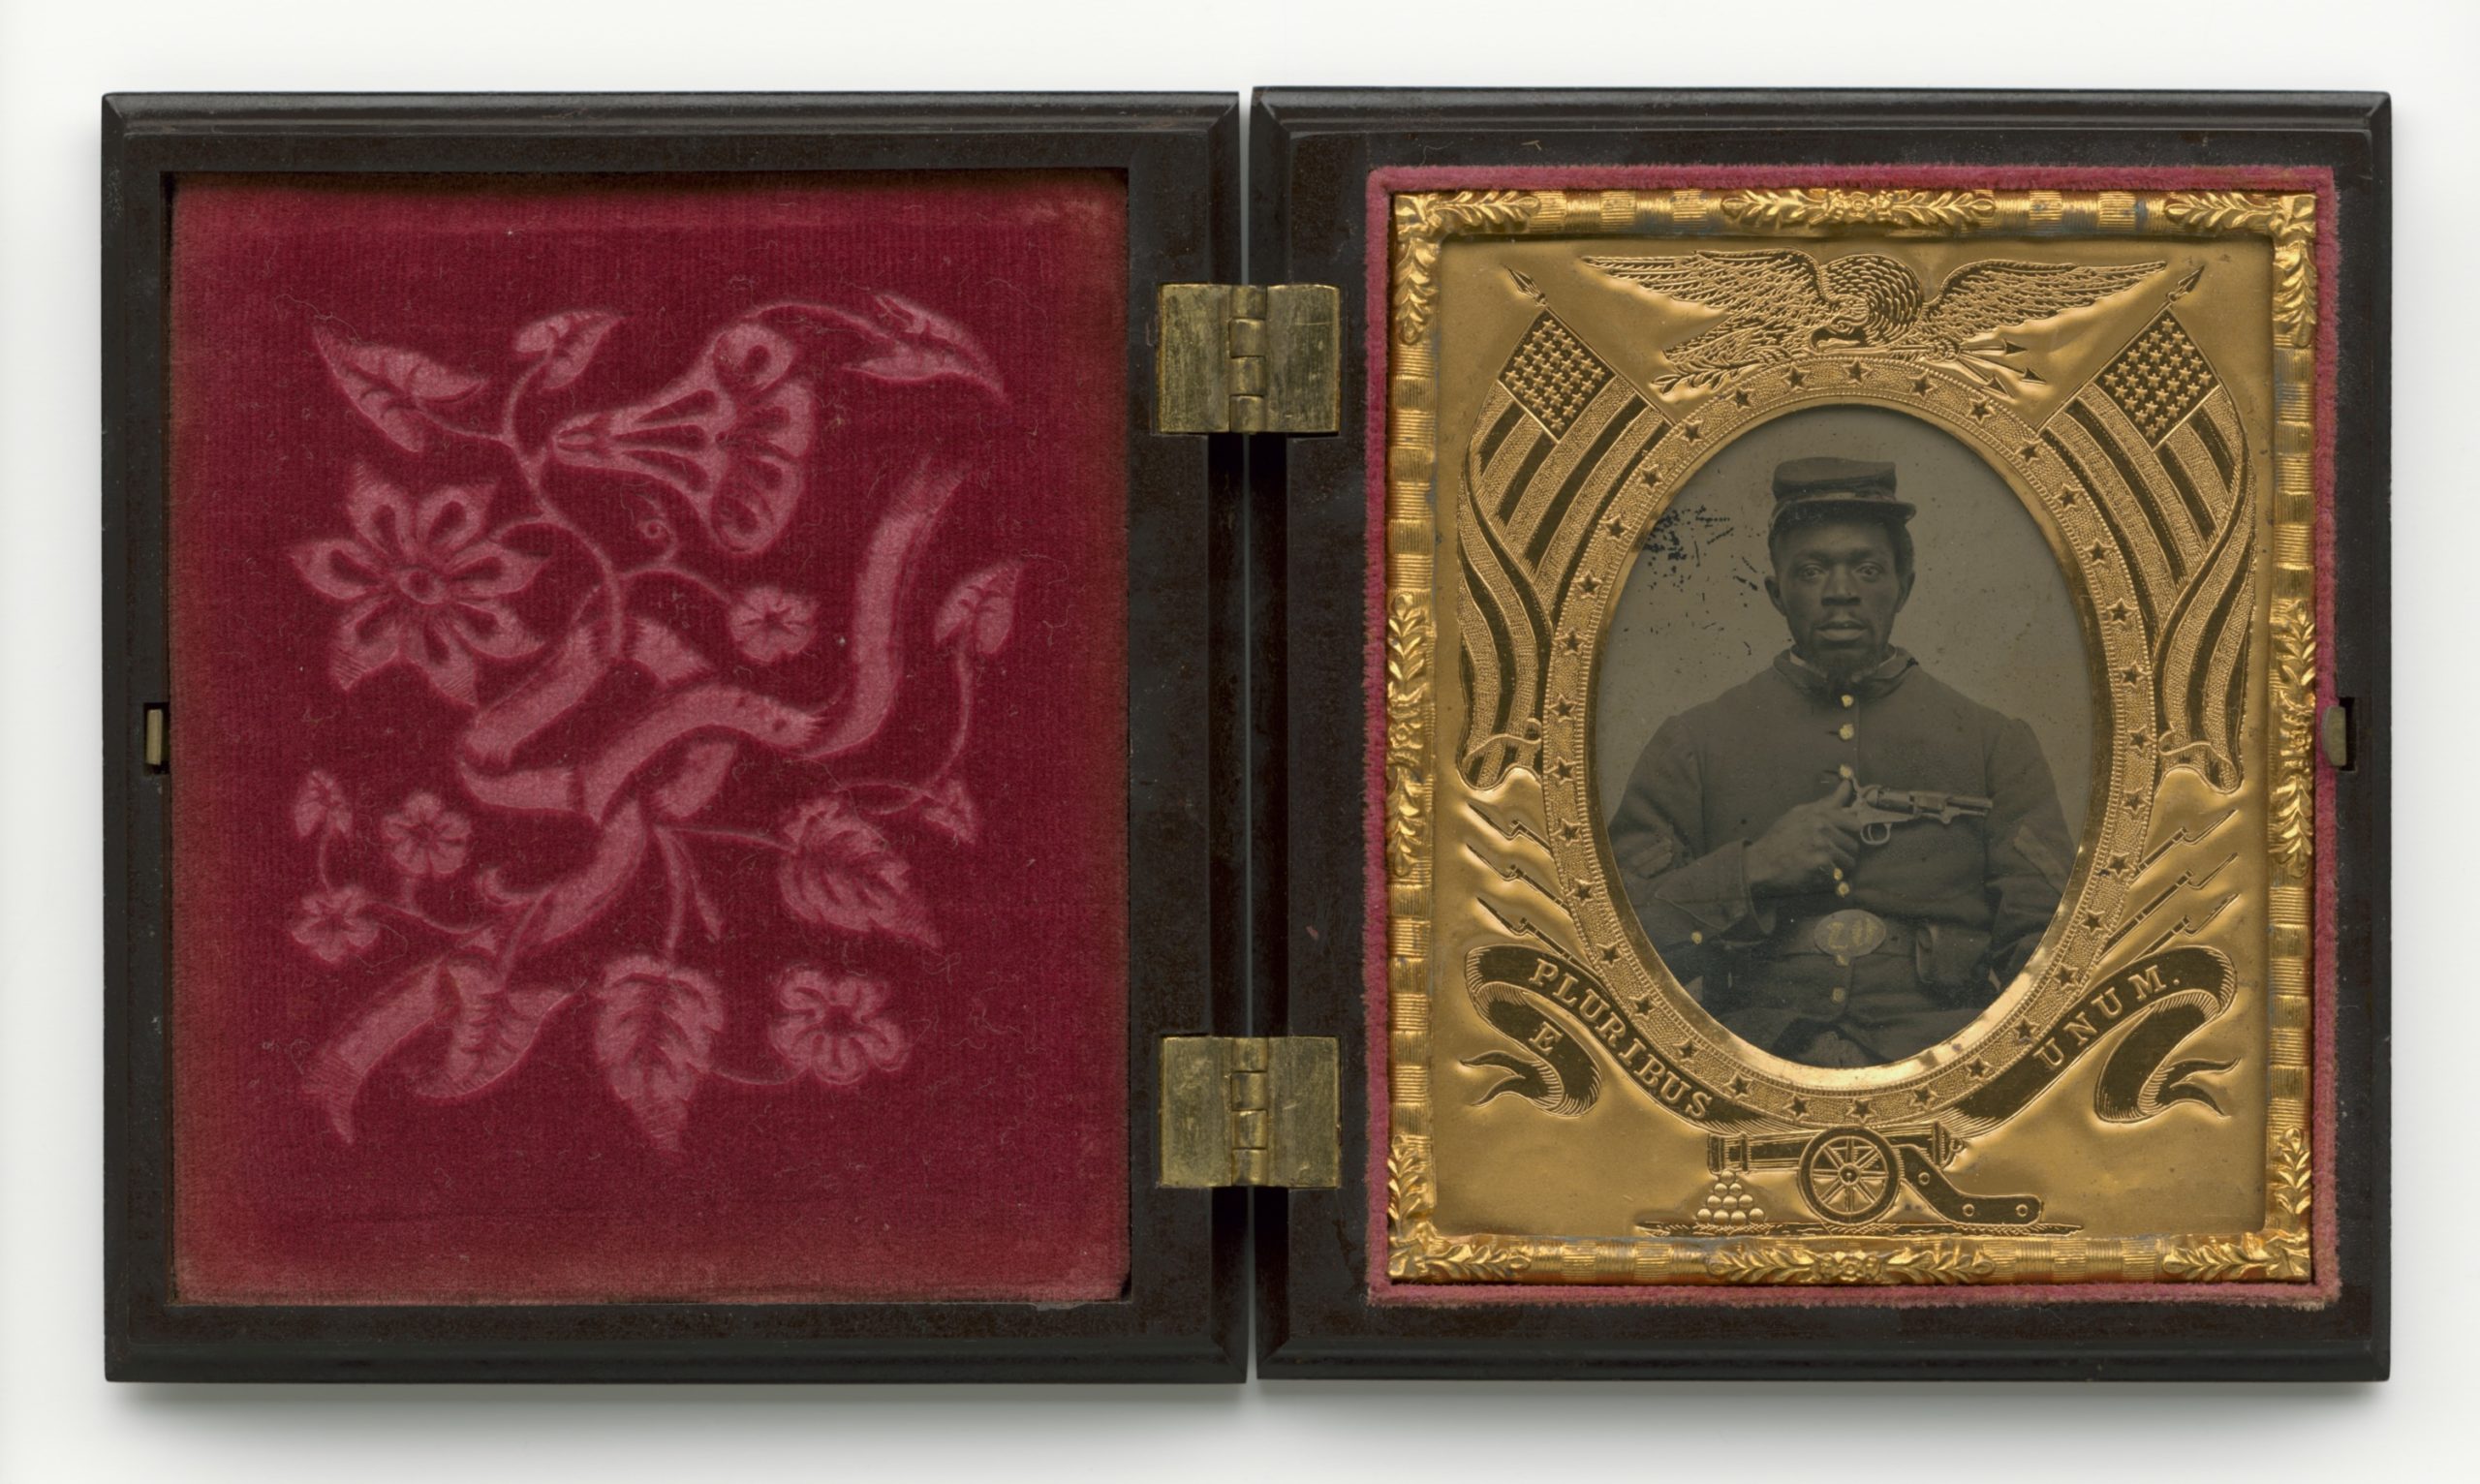 <span style="font-weight: 400;">Unidentified Black U.S. soldier, c. 1861–65, hand-colored tintype with cover glass in black thermoplastic case with brass hinges and red velvet liner (</span><a href="https://nmaahc.si.edu/object/nmaahc_2011.51.12?destination=/explore/collection/search%3Fedan_q%3D%252A%253A%252A%26edan_fq%255B0%255D%3Dtopic%253A%2522Military%2522%26edan_local%3D1">Smithsonian National Museum of African American History and Culture</a><span style="font-weight: 400;">)</span>